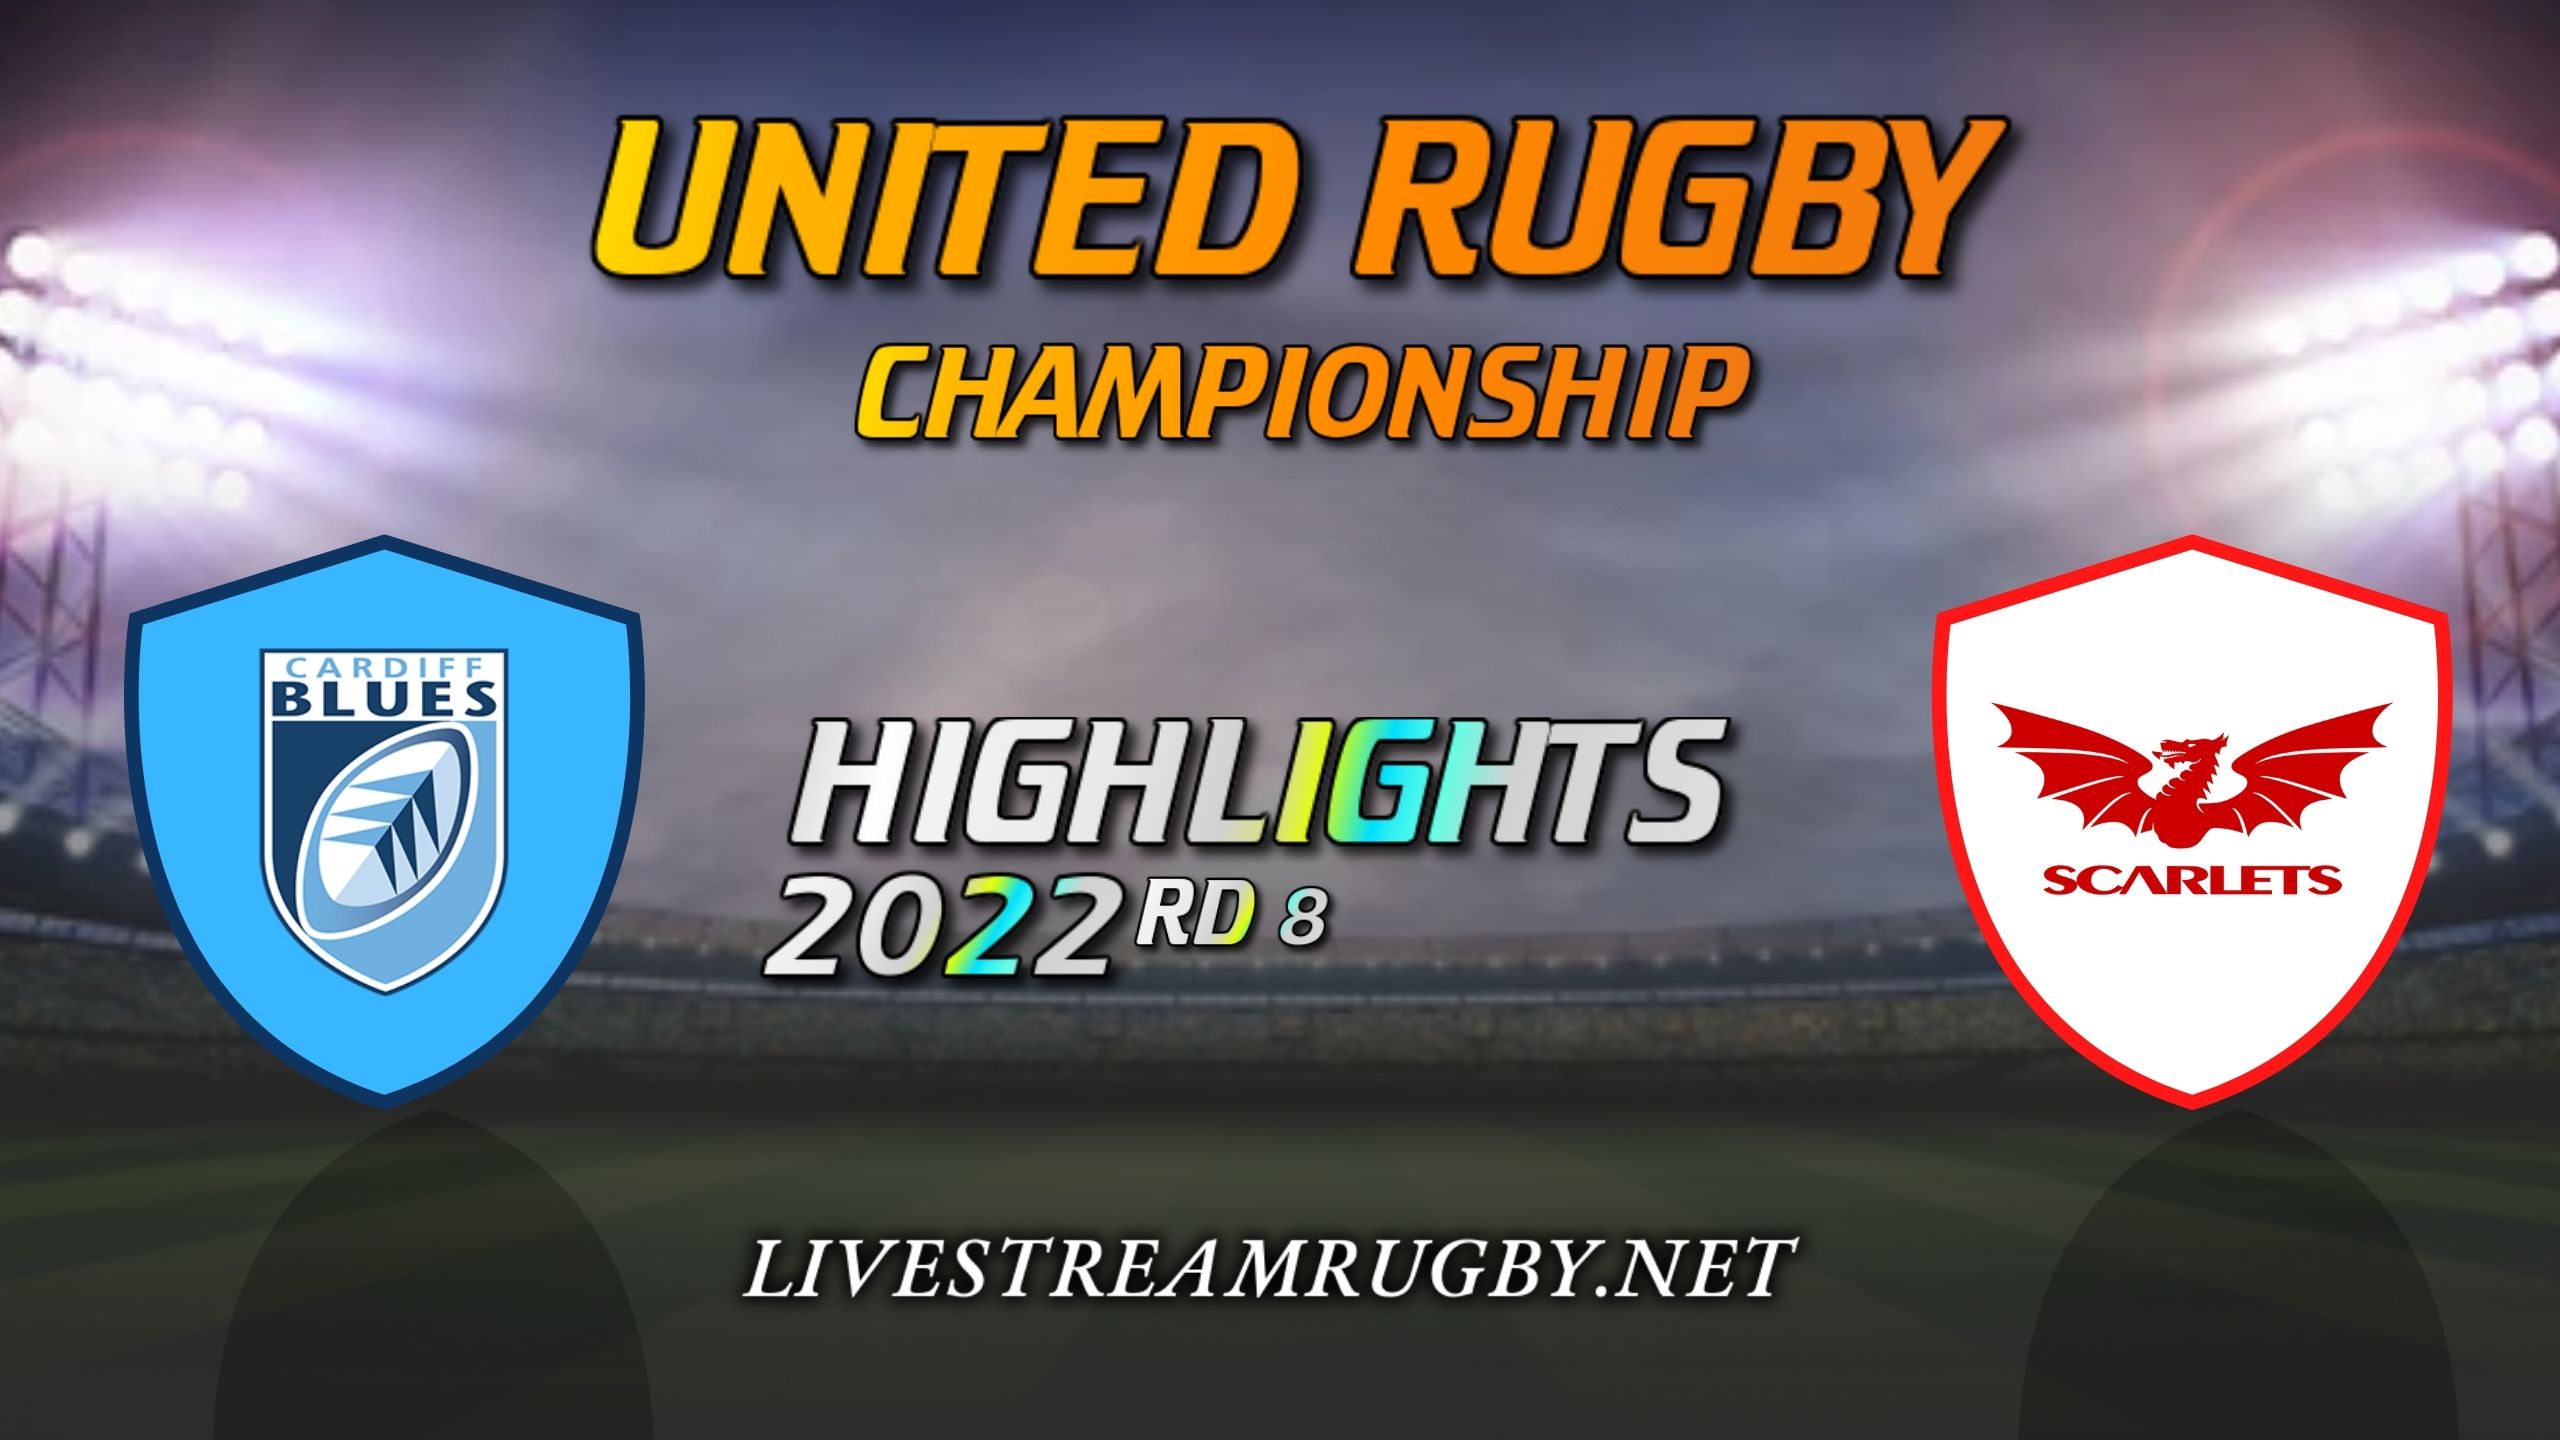 Cardiff Rugby Vs Scarlets Highlights 2022 Rd 8 United Rugby